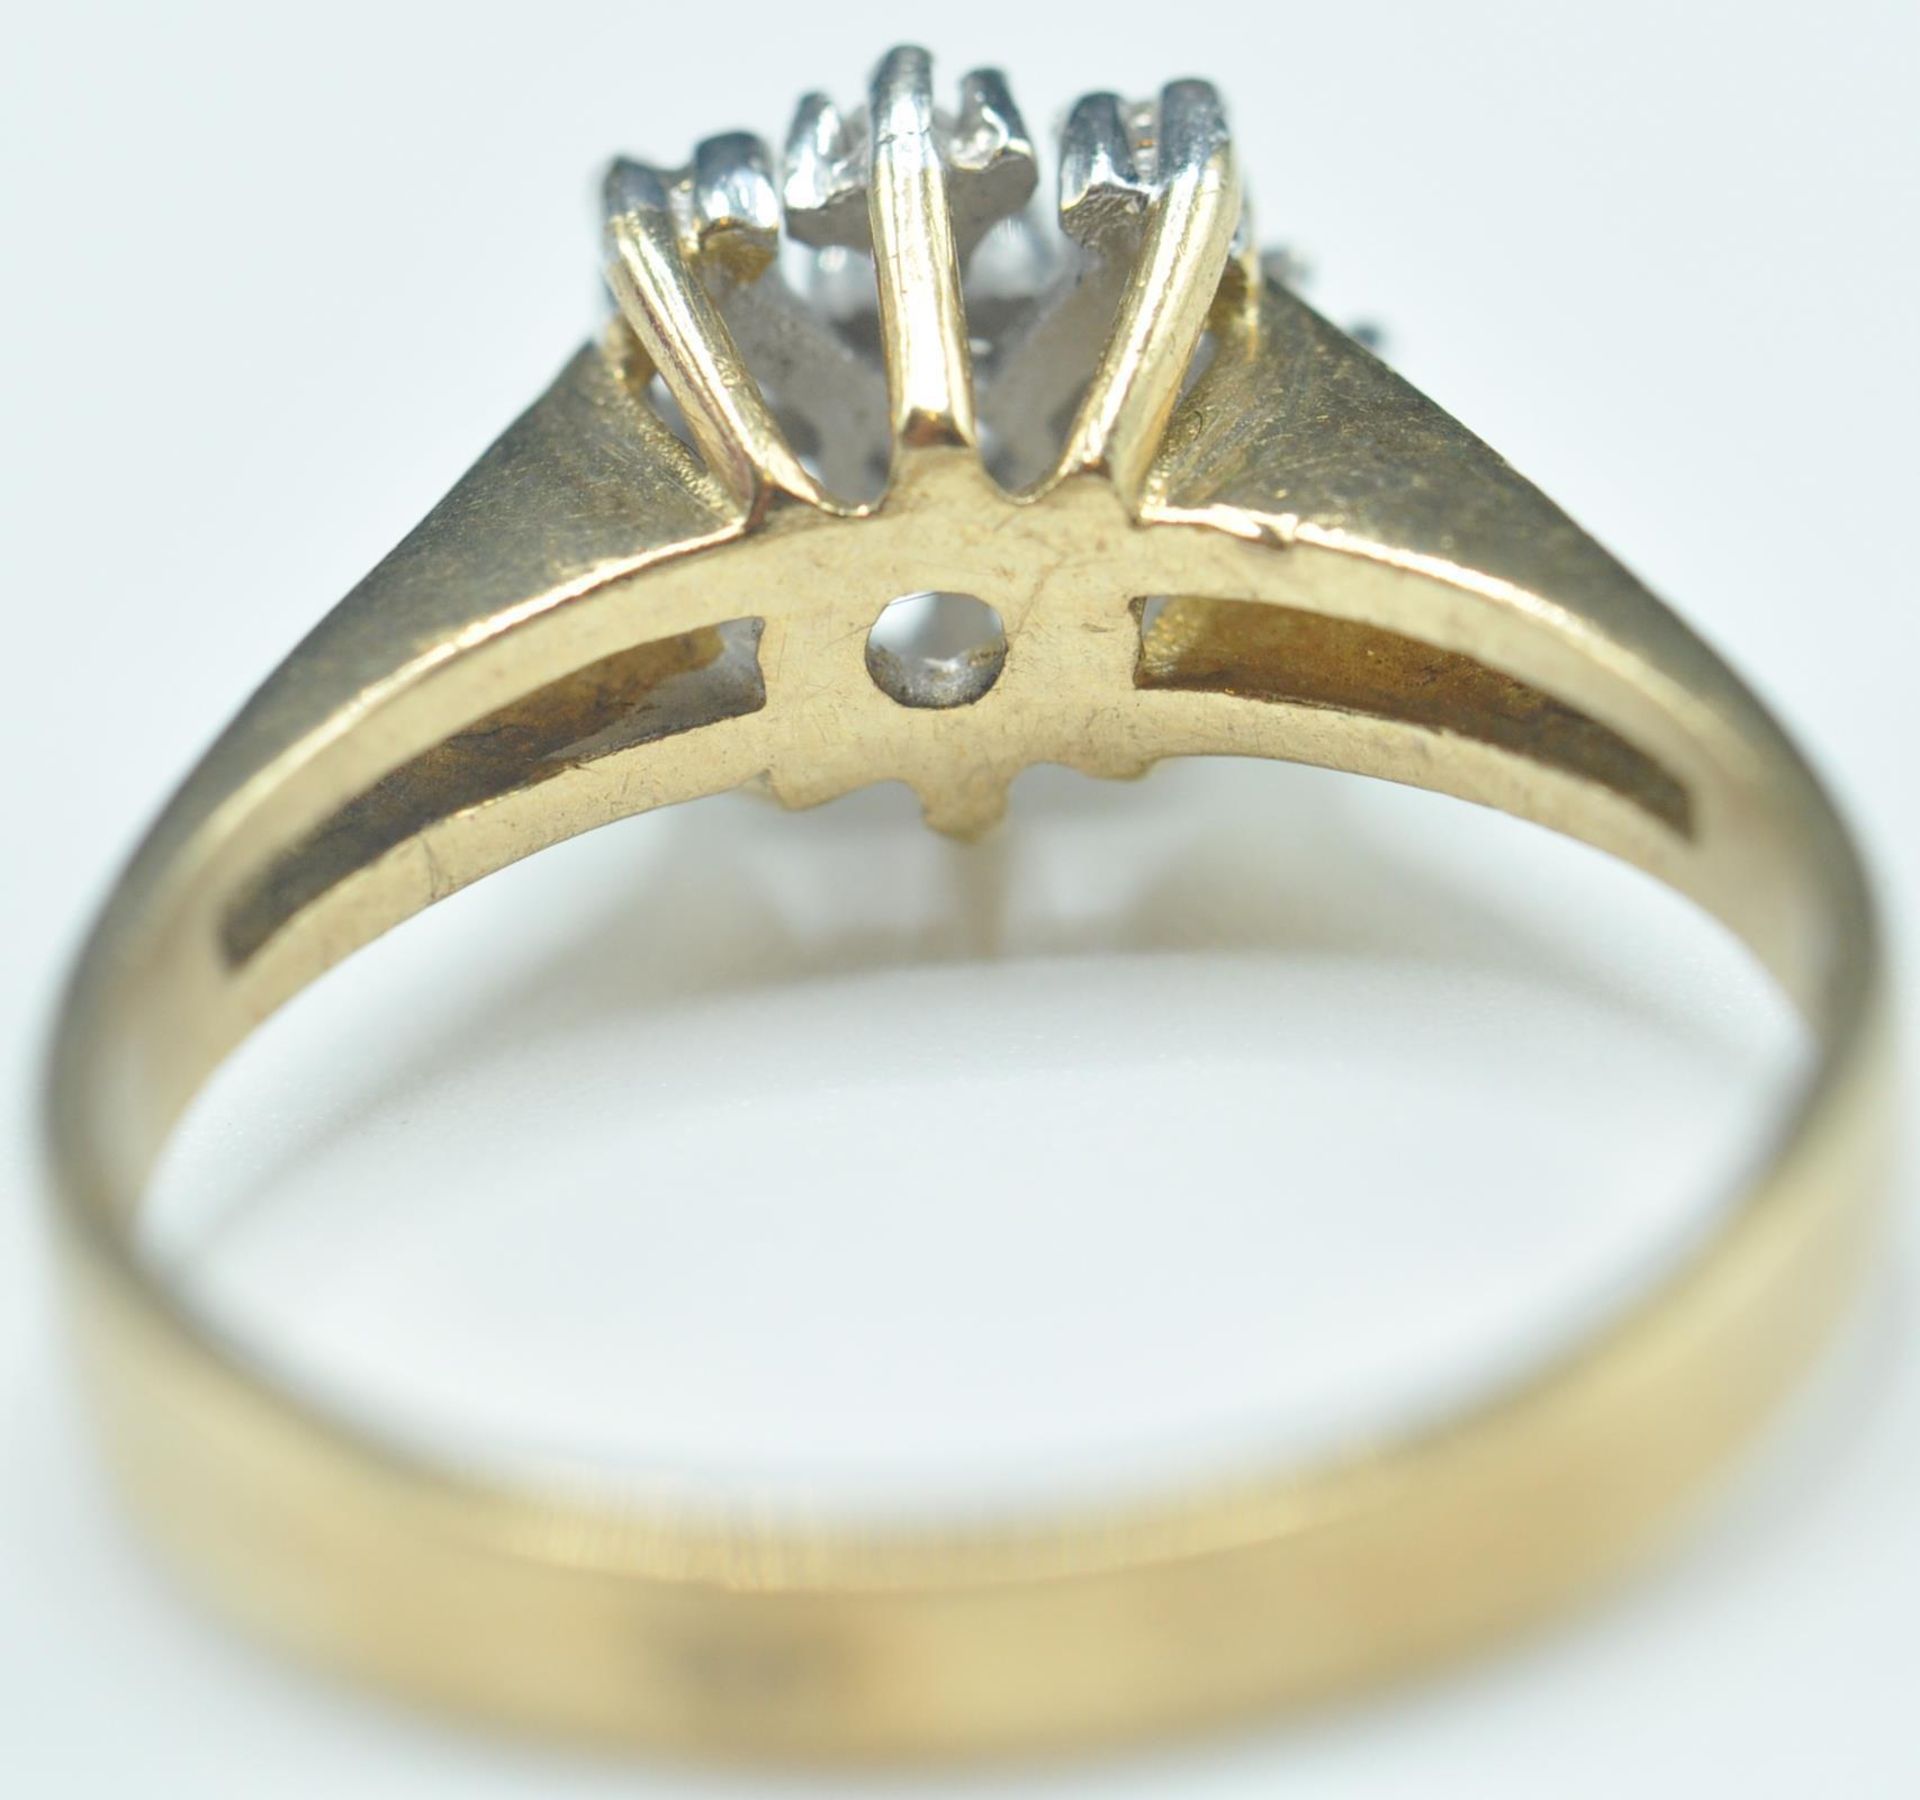 YELLOW GOLD AND DIAMOND RING - Image 5 of 8